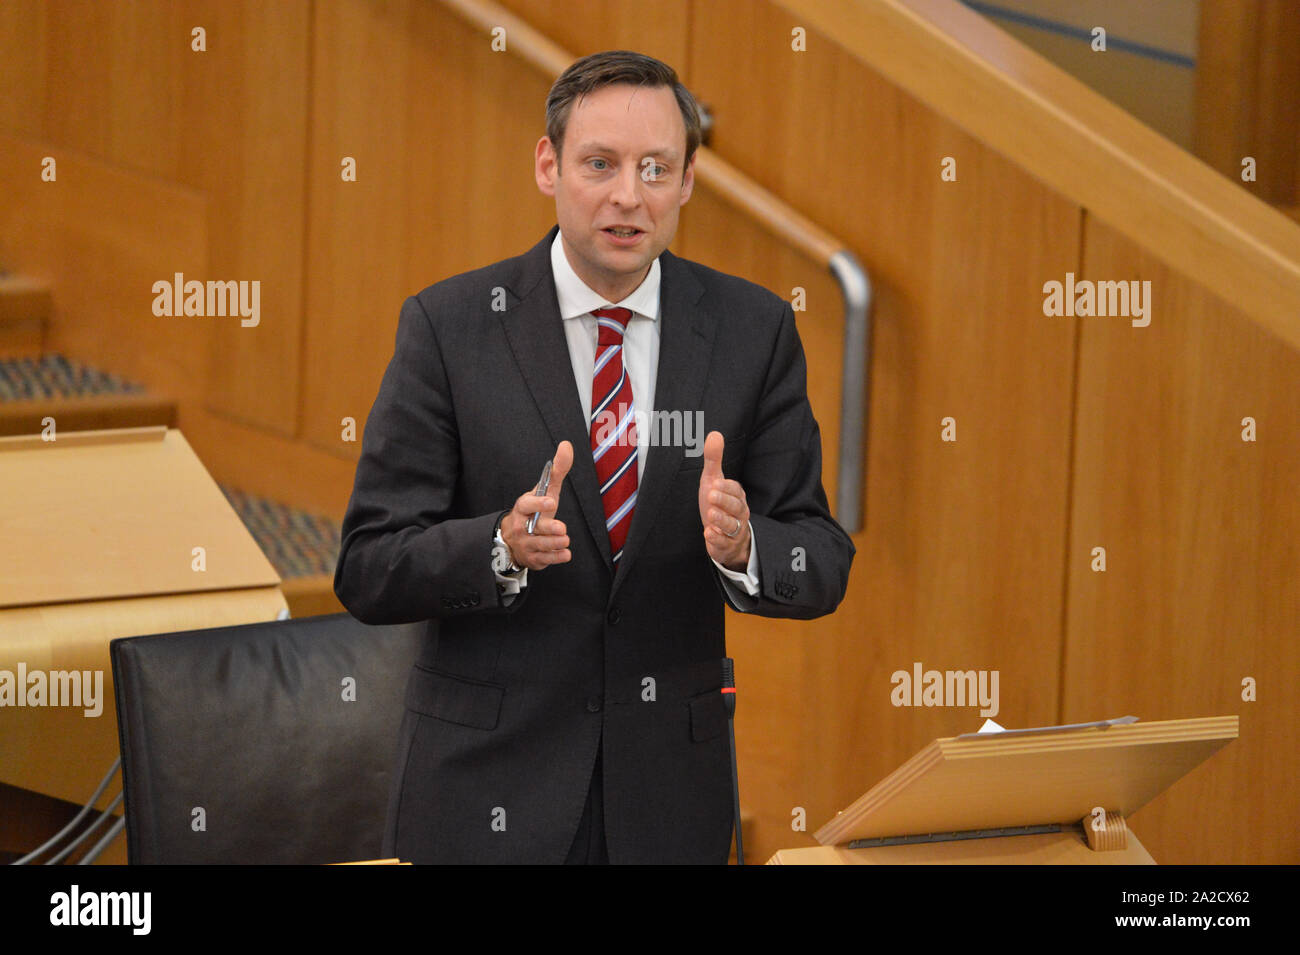 Edinburgh, 2 October 2019. Pictured: Liam Kier MSP - Depute Leader of the Scottish Conservative and Unionist Party. Afternoon debate in the chamber: Don't Extend the ScotRail Franchise.  Scottish Labour are wanting to replace the Dutch owned firm Abellio and nationalise ScotRail after its many failings from over crowding to cancelled trains.  Credit: Colin Fisher/Alamy Live News Stock Photo